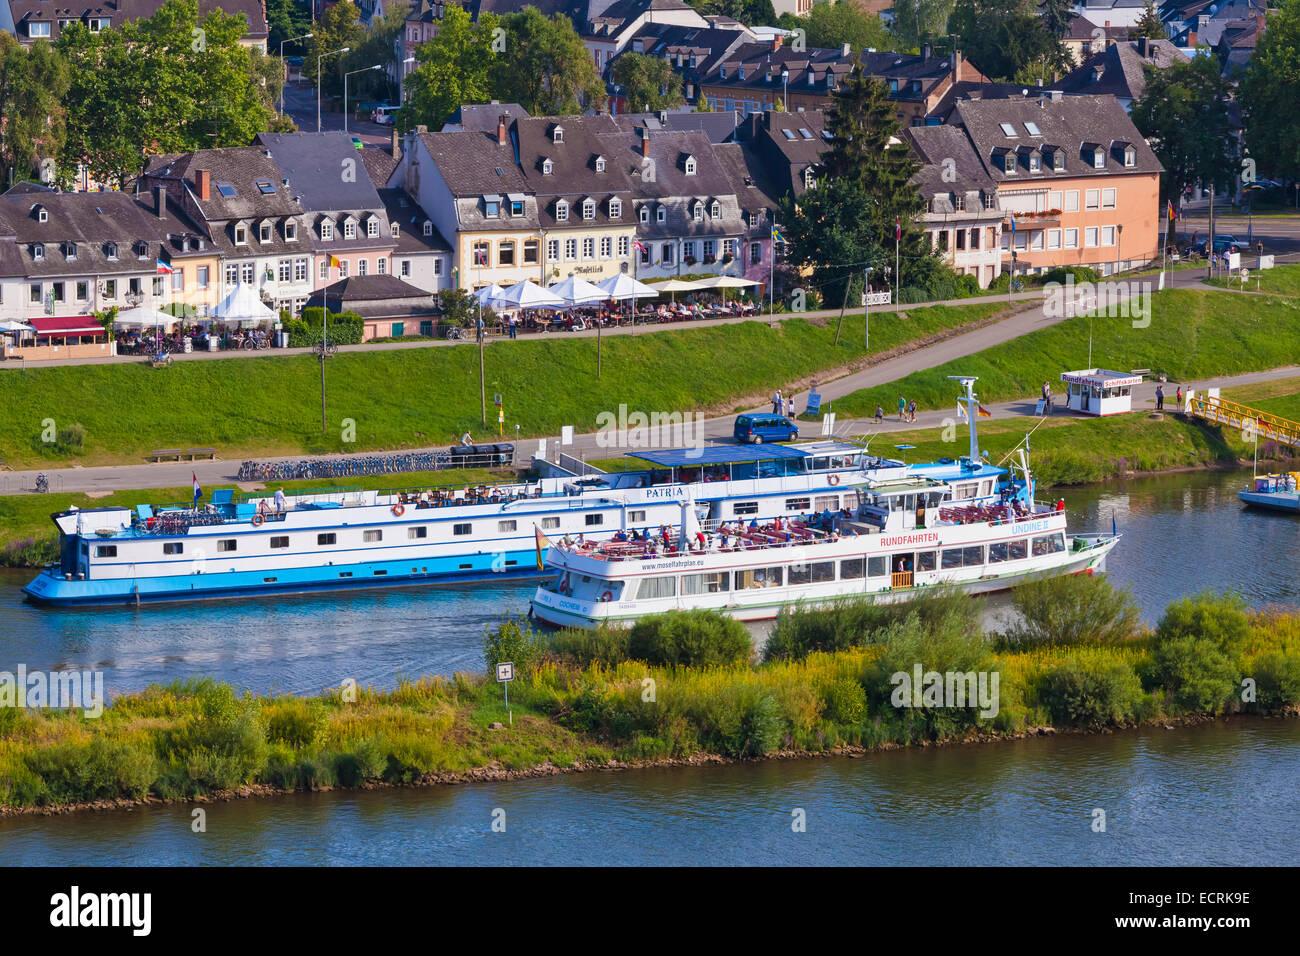 SHIPPING PIER, EXCURSION BOATS, MOSELLE RIVER, TRIER, TREVES, RHINELAND-PALATINATE, GERMANY Stock Photo